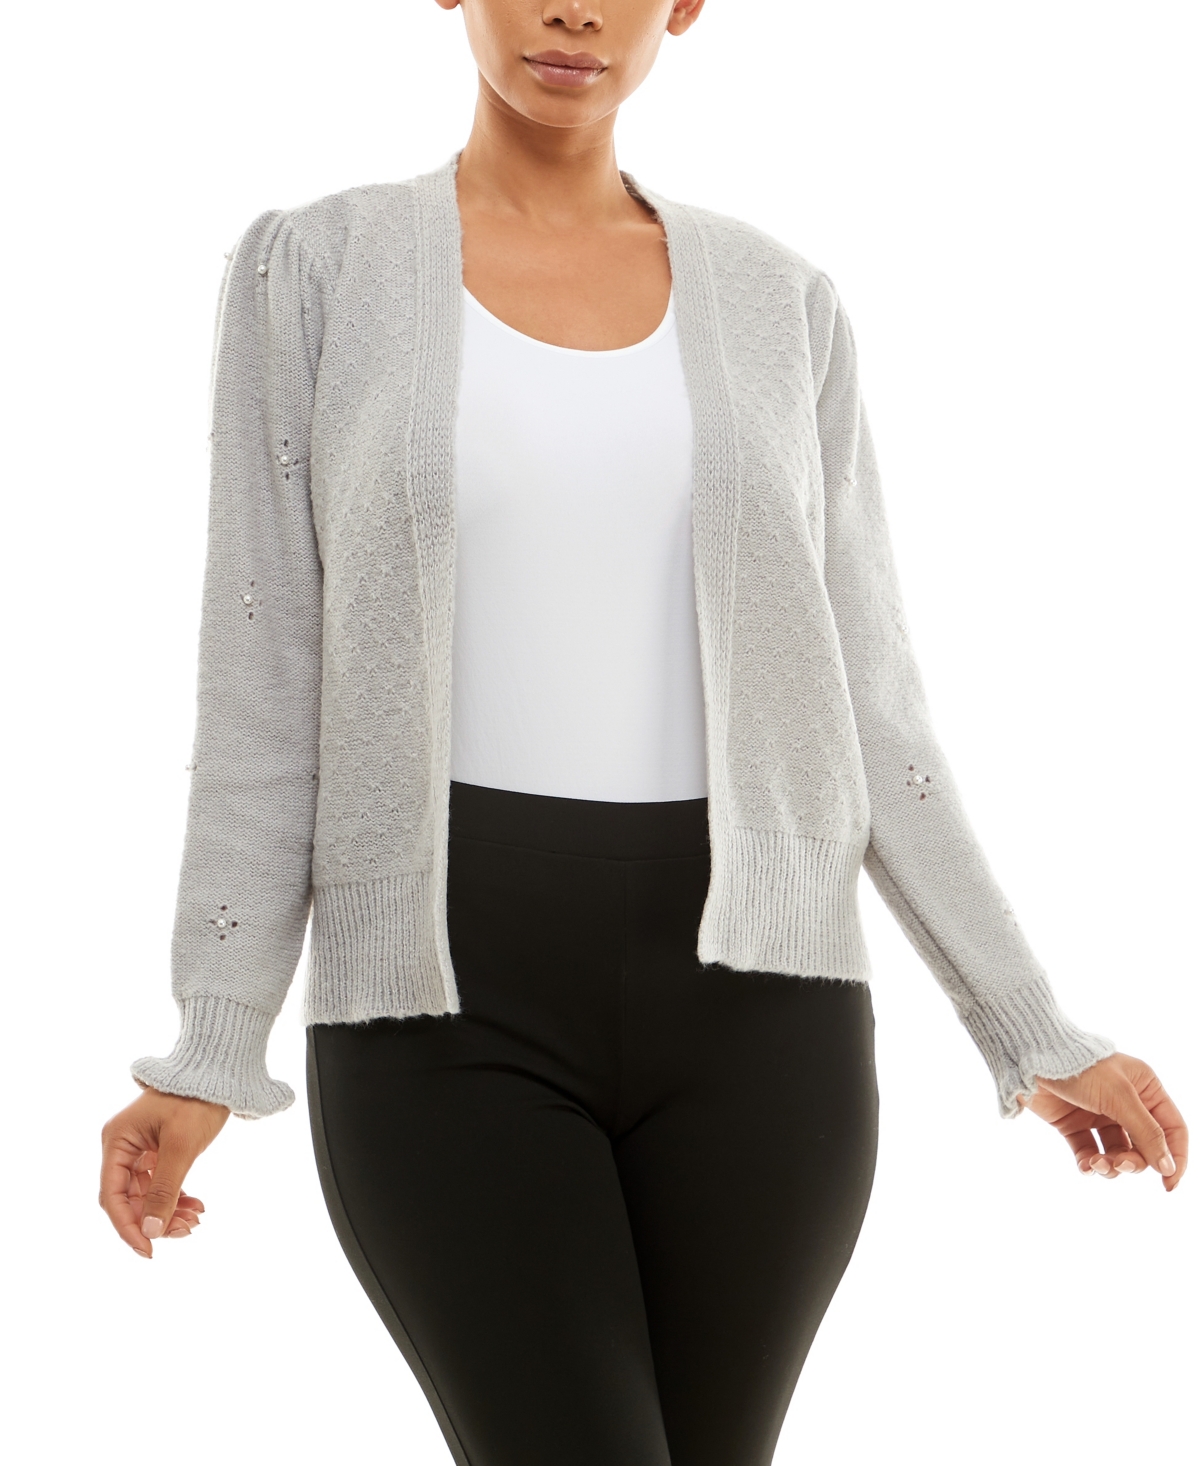 Women's Long Sleeve Novelty Stitch Front Sweater Cardigan with Imitation-Pearls - Light Gray Heather